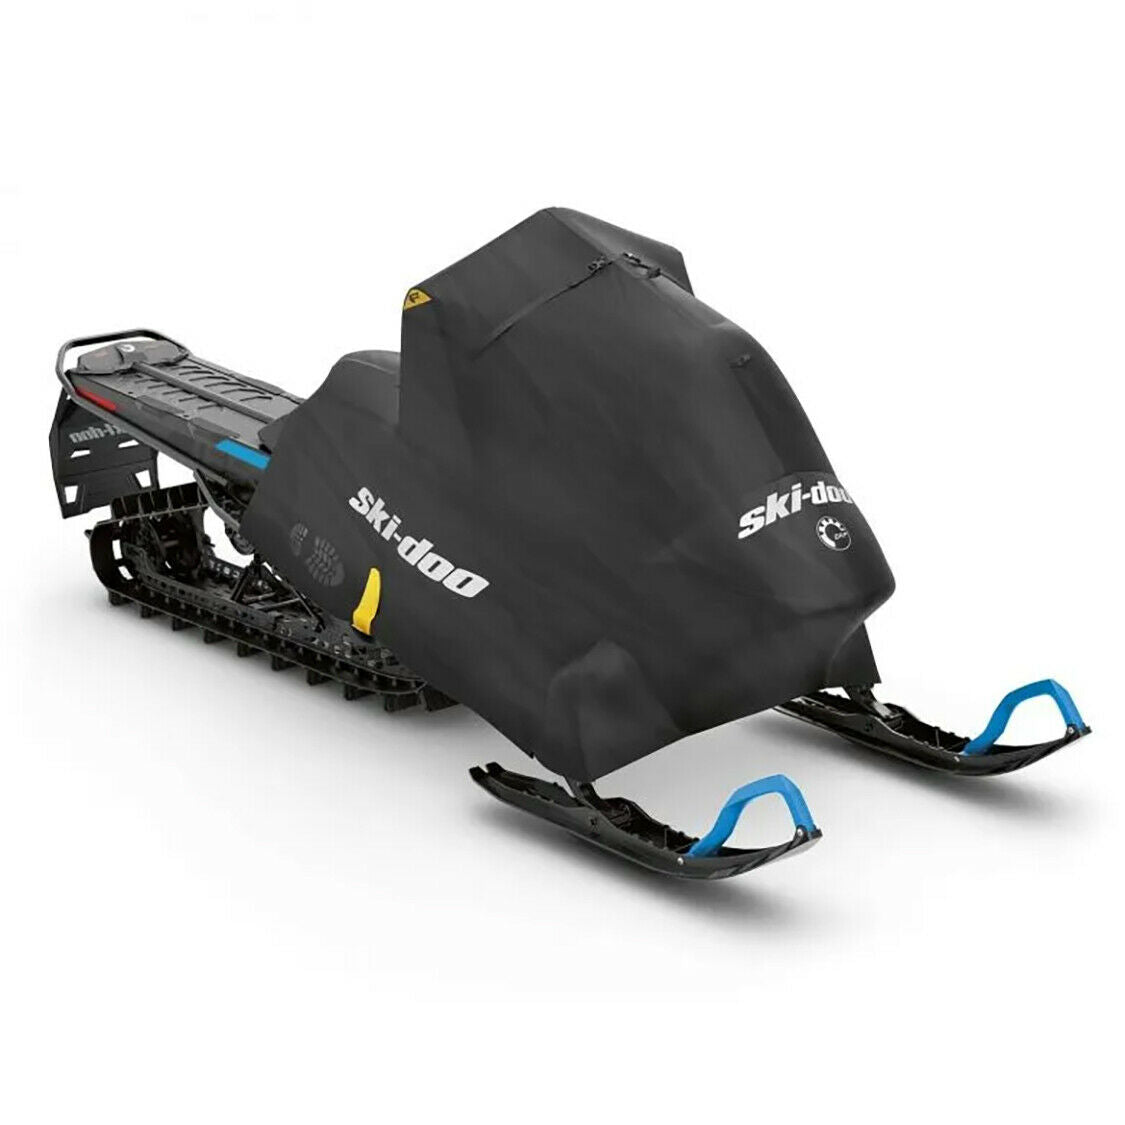 Ski-Doo Ride On Cover (ROC) System 860201973